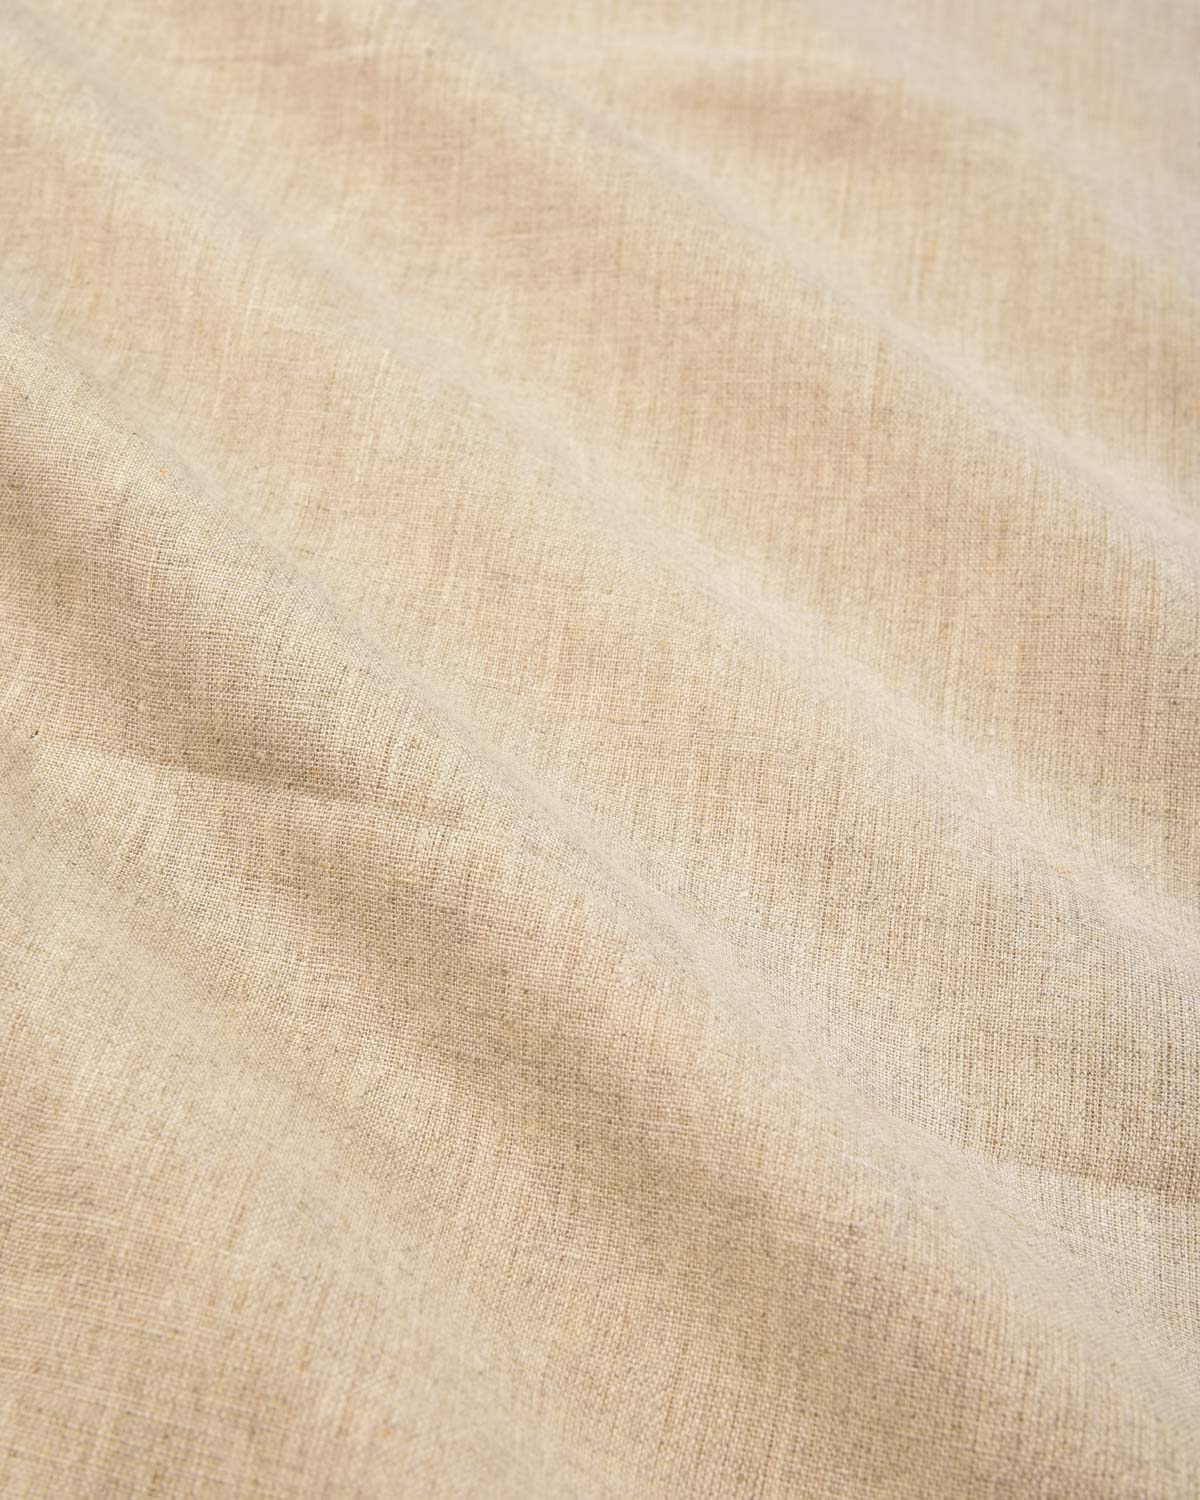 Beige Woven Linen Cotton Fabric - By HolyWeaves, Benares